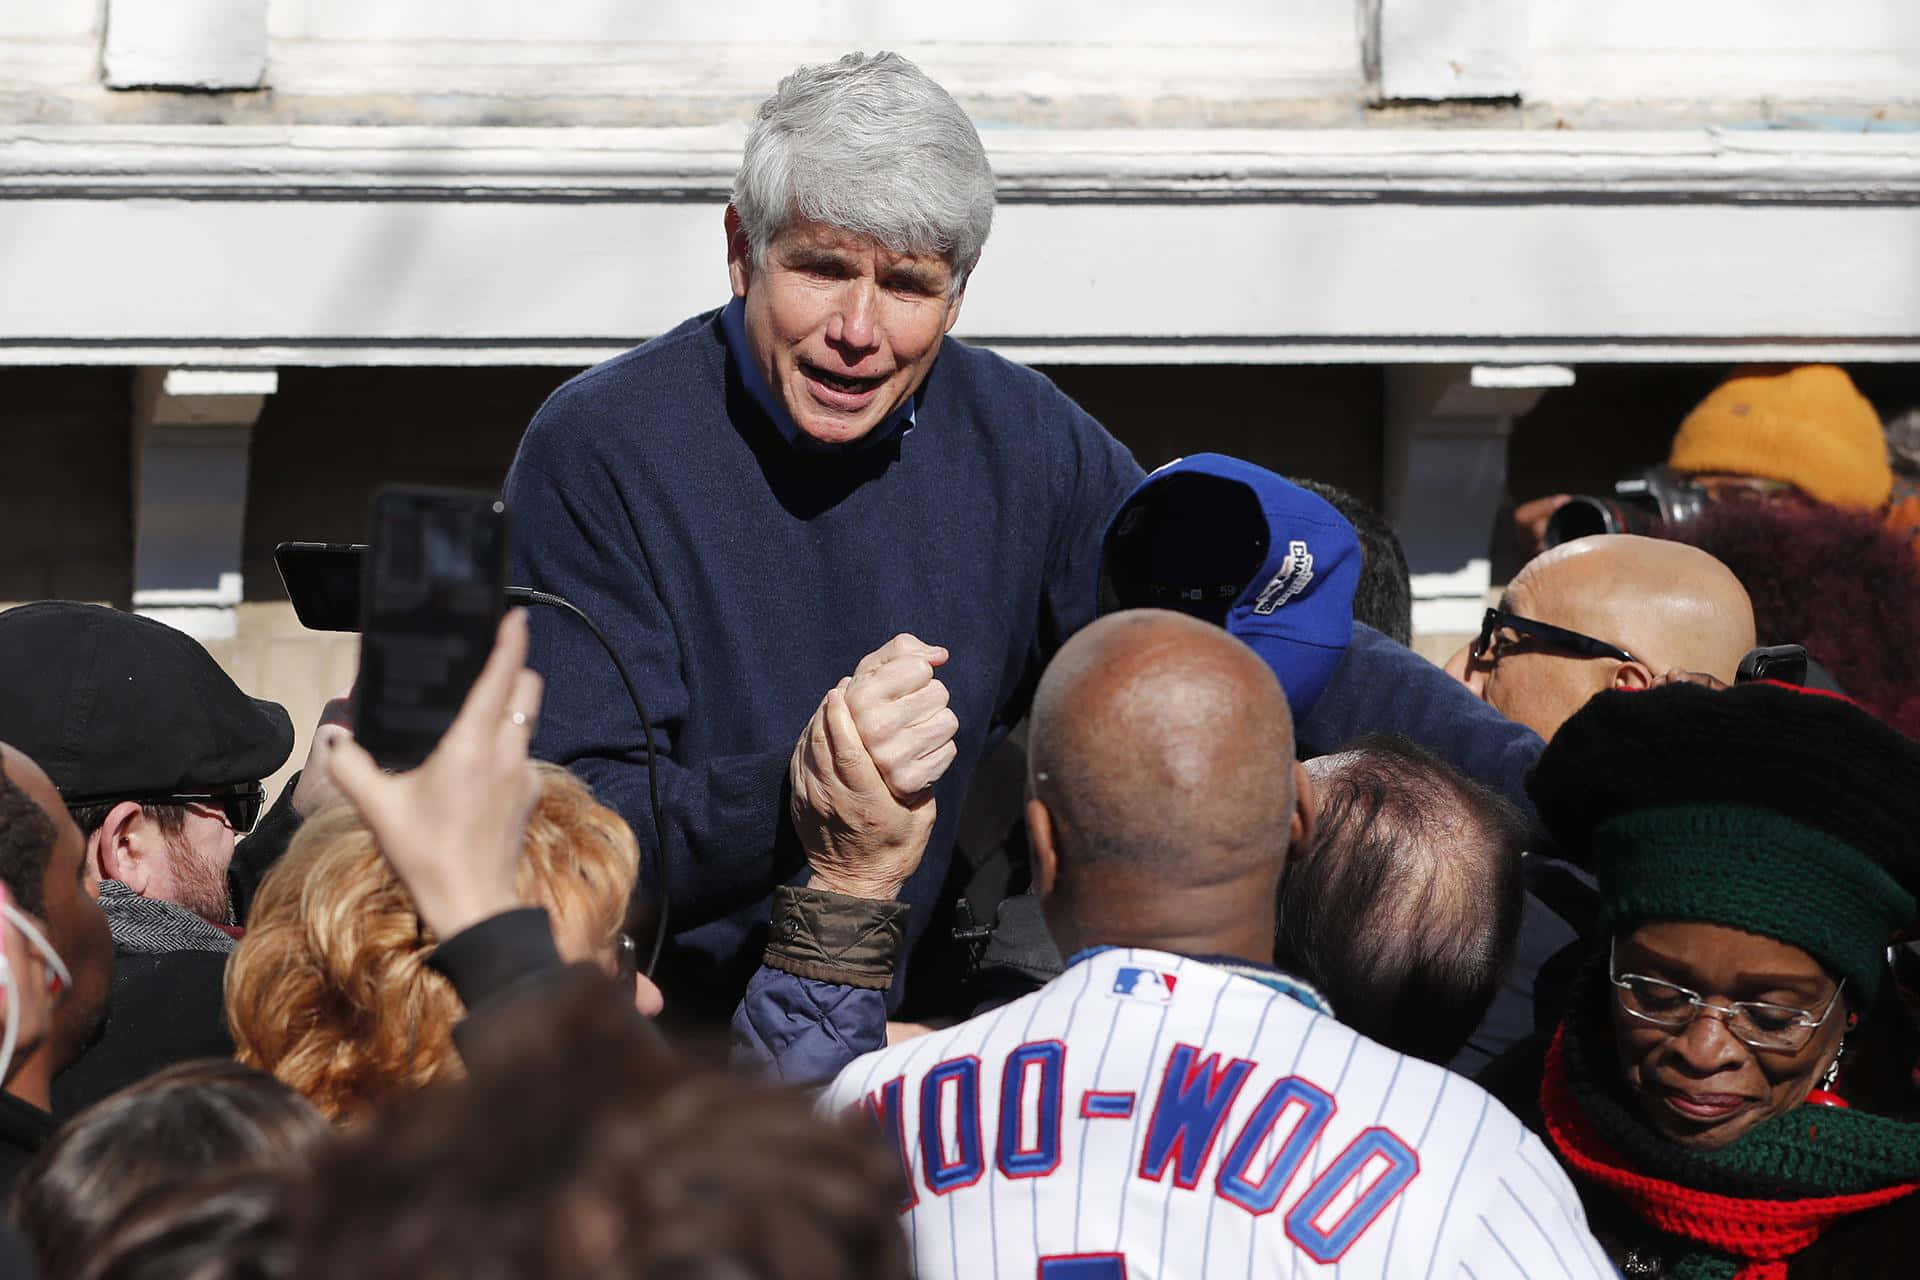 Rod Blagojevich Greeting Supporters Wallpaper